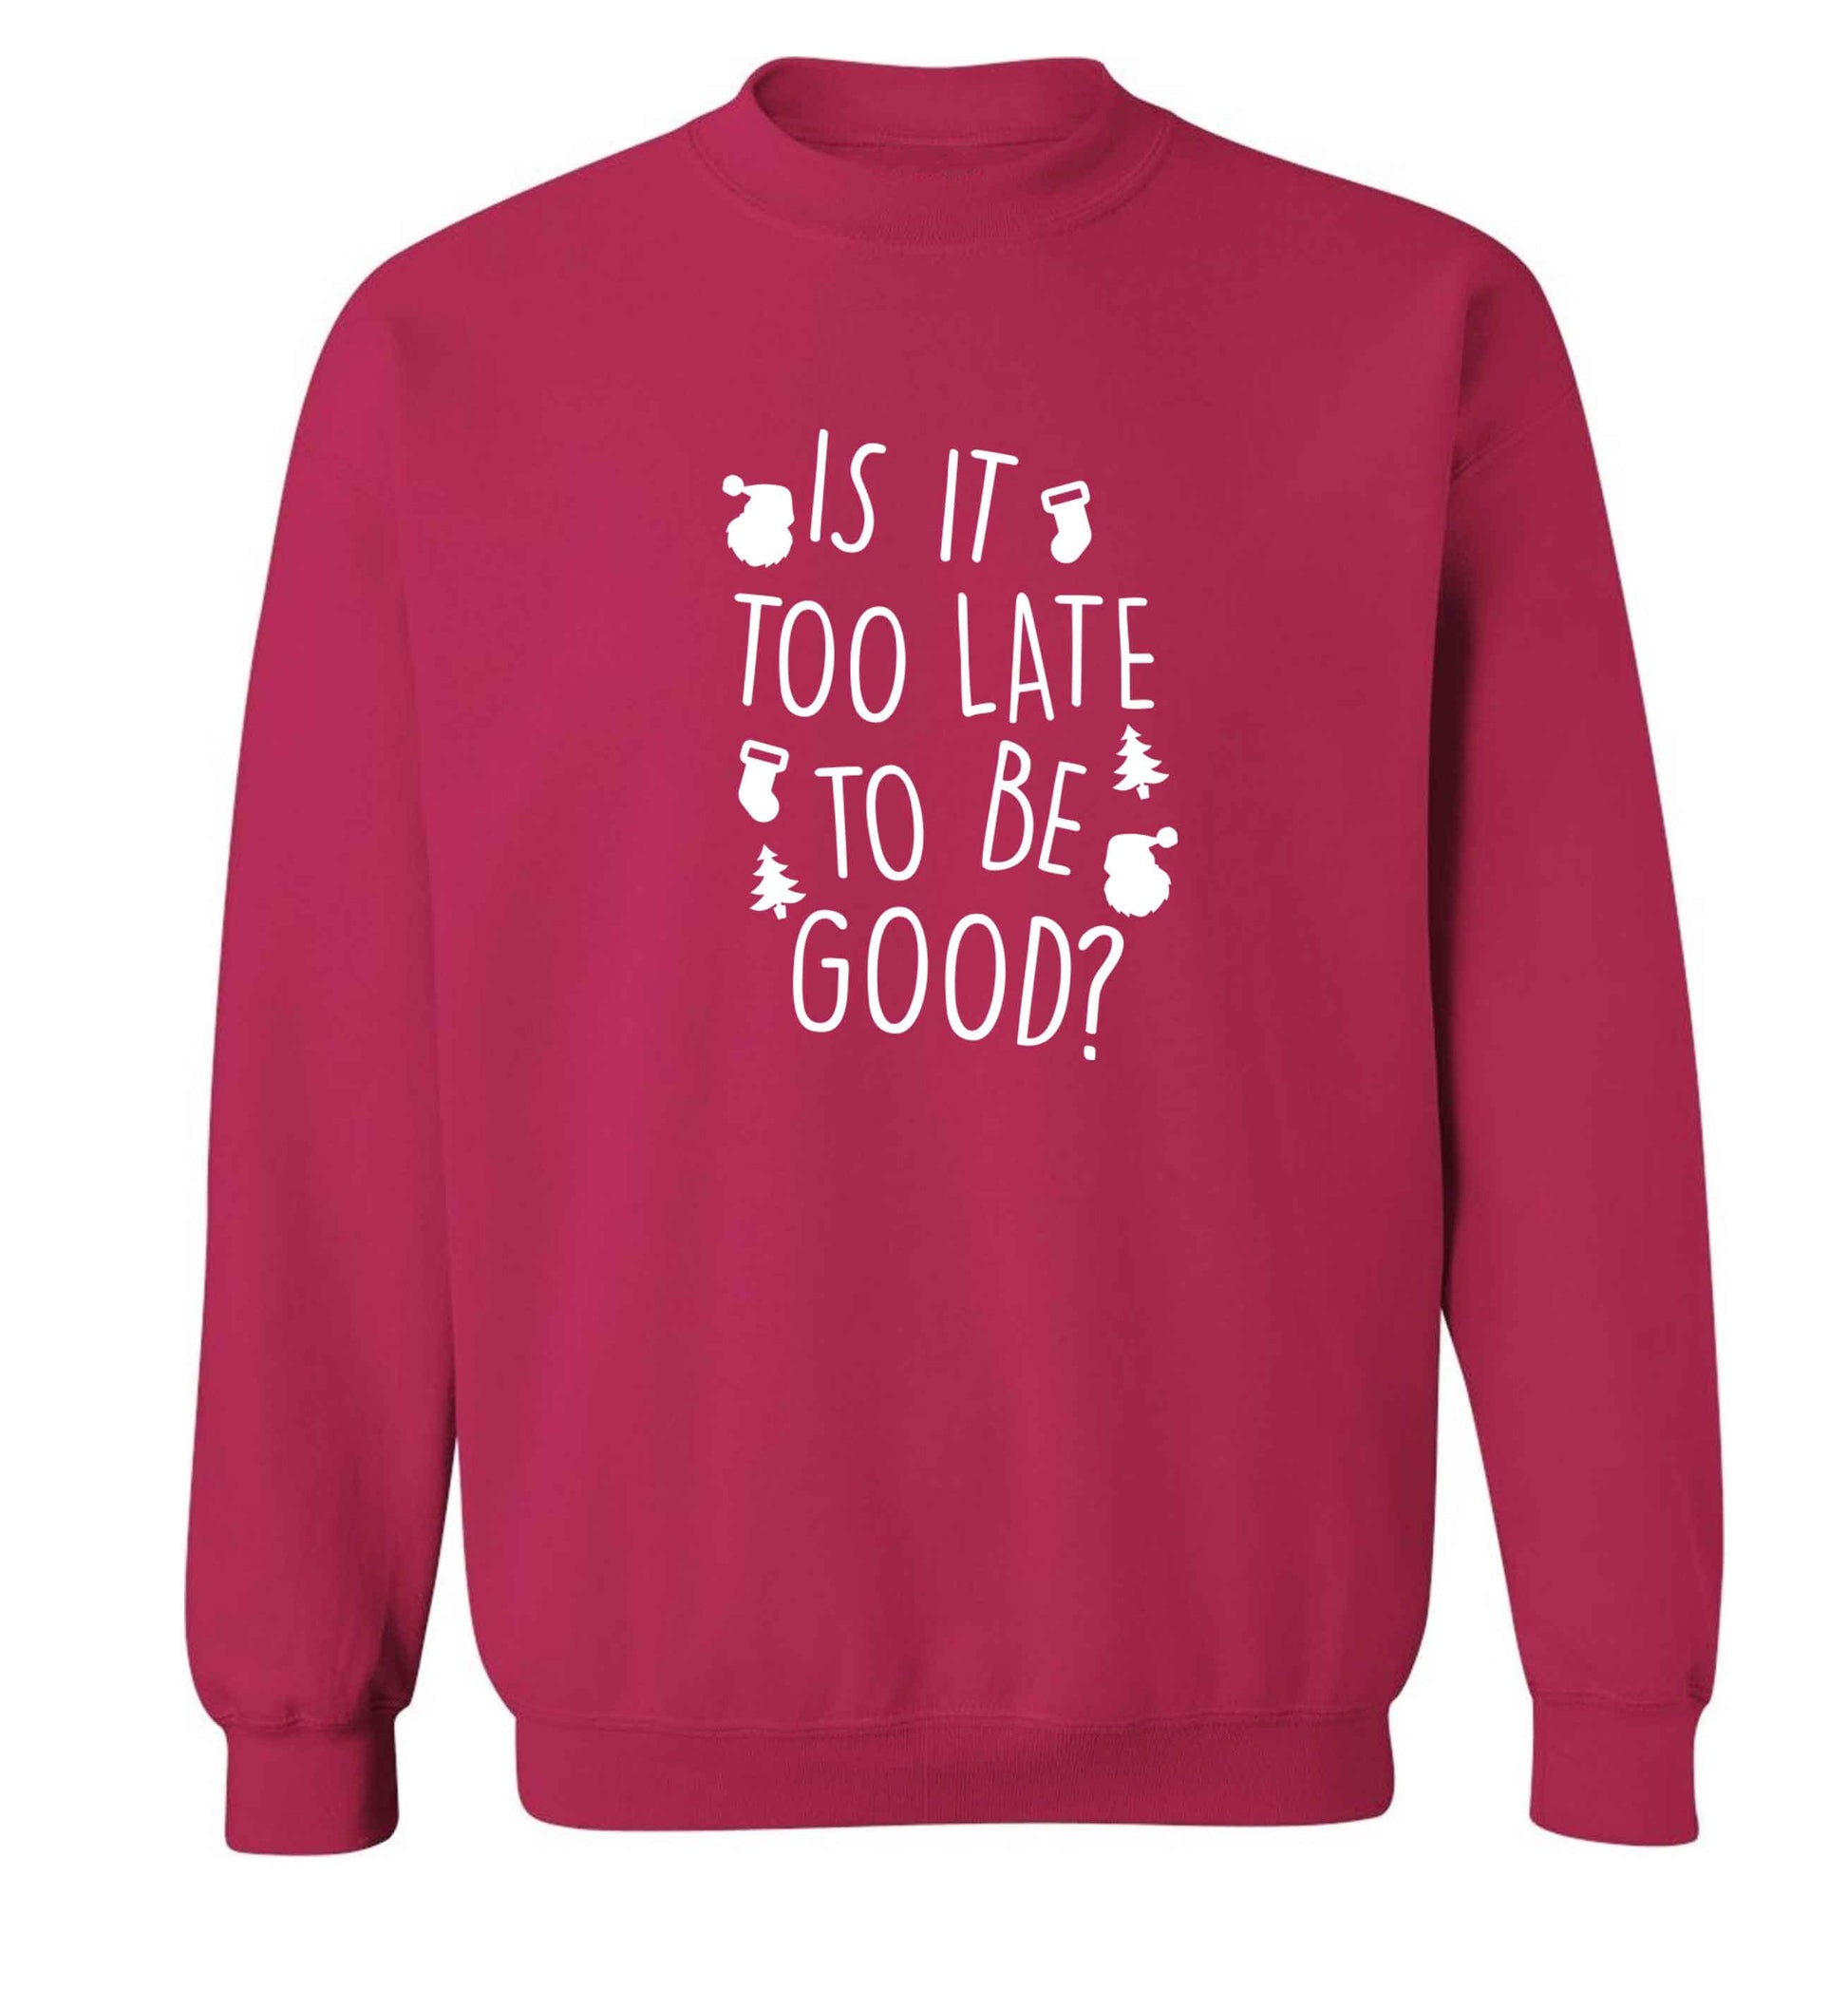 Too Late to be Good adult's unisex pink sweater 2XL